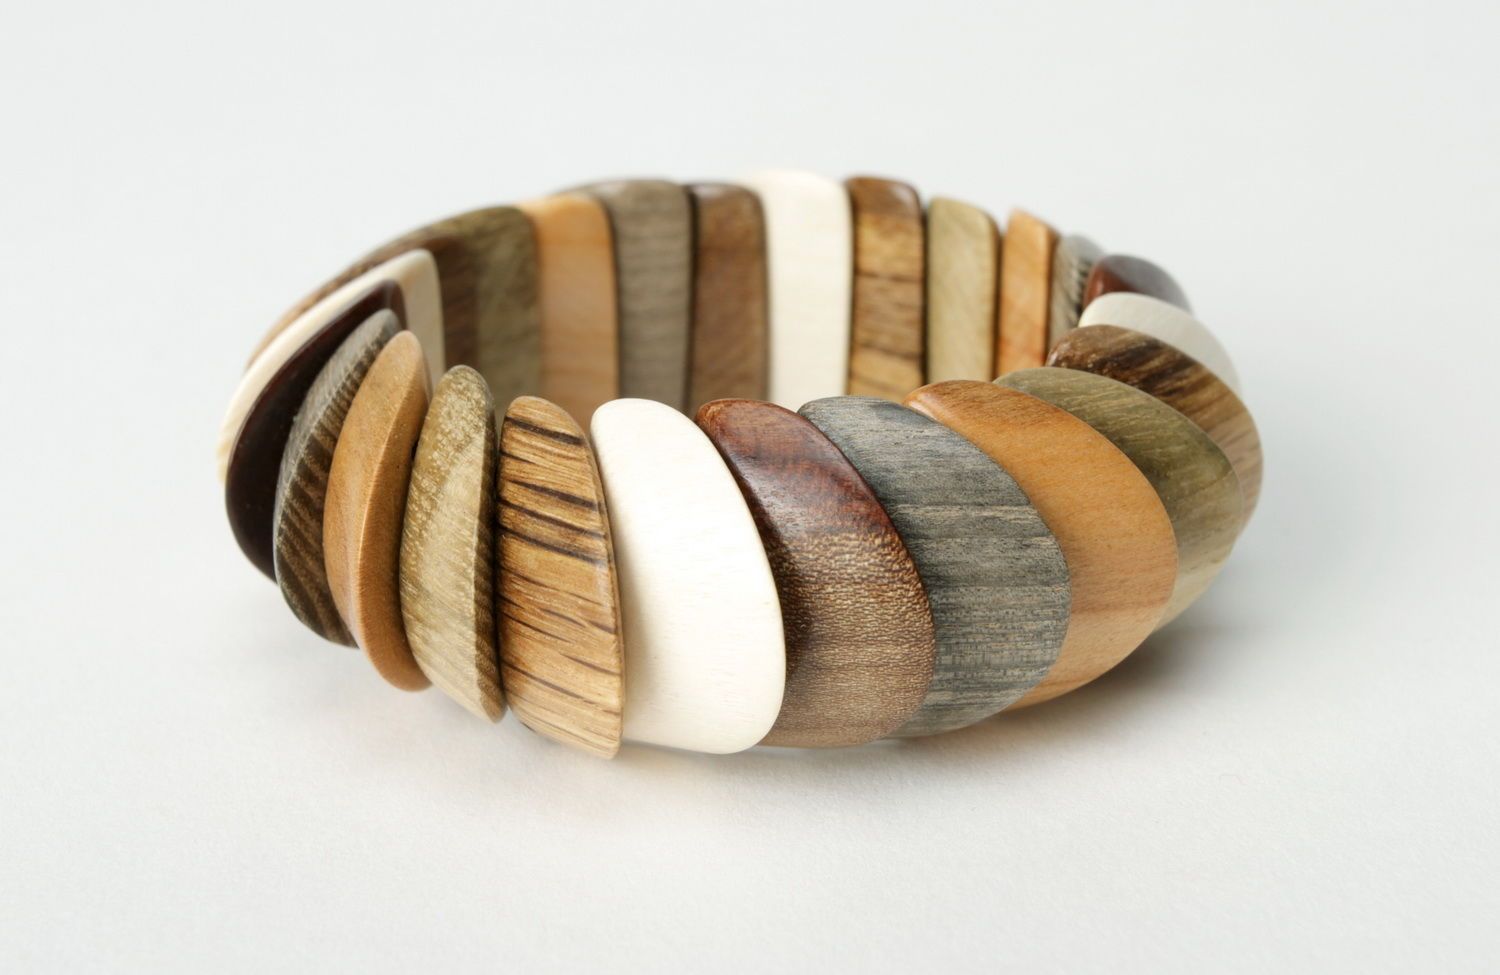 Wrist bracelet made of different wood species photo 1